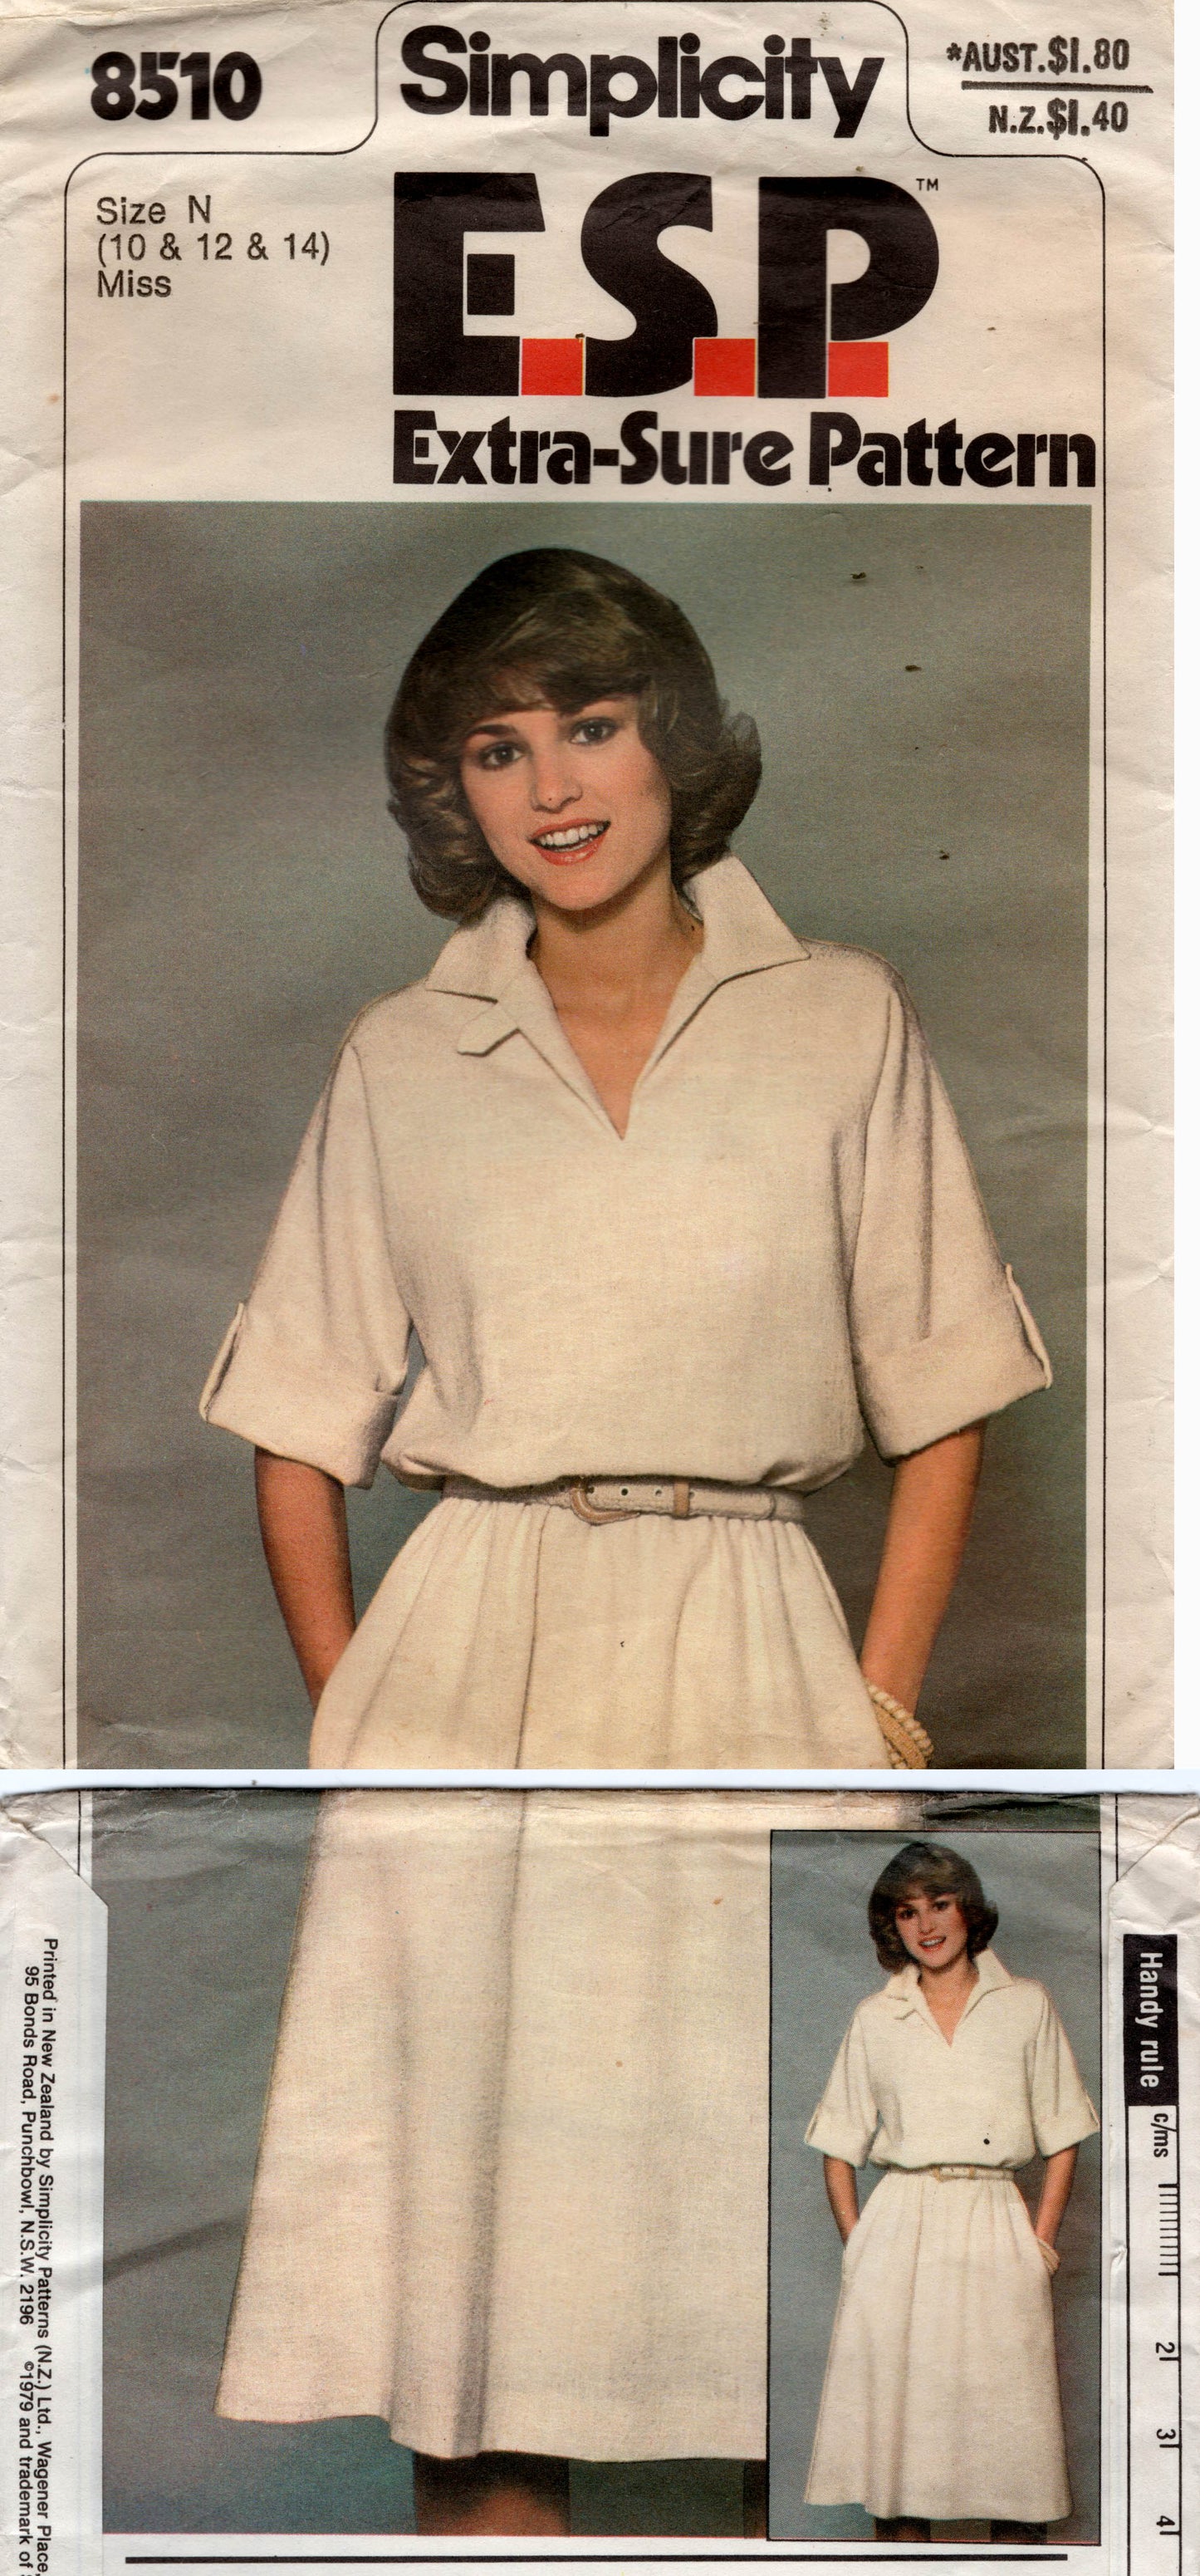 Simplicity 8510 Womens EASY Retro Pullover Shirtdress 1970s Vintage Sewing Pattern Size 10 - 14 UNCUT Factory Folded